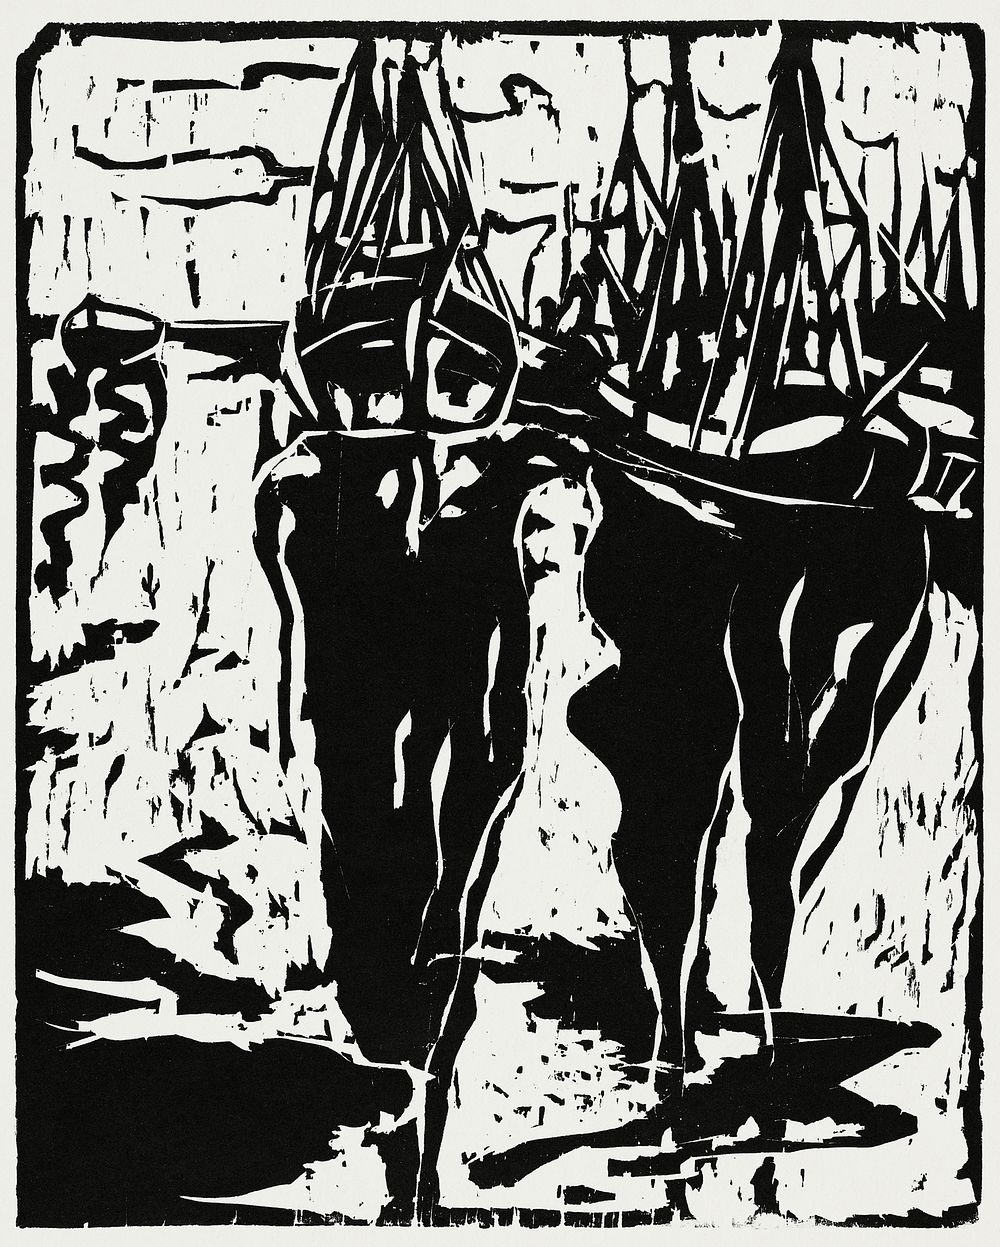 Port Scene (1908) print in high resolution by Ernst Ludwig Kirchner. Original from The National Gallery of Art. Digitally…